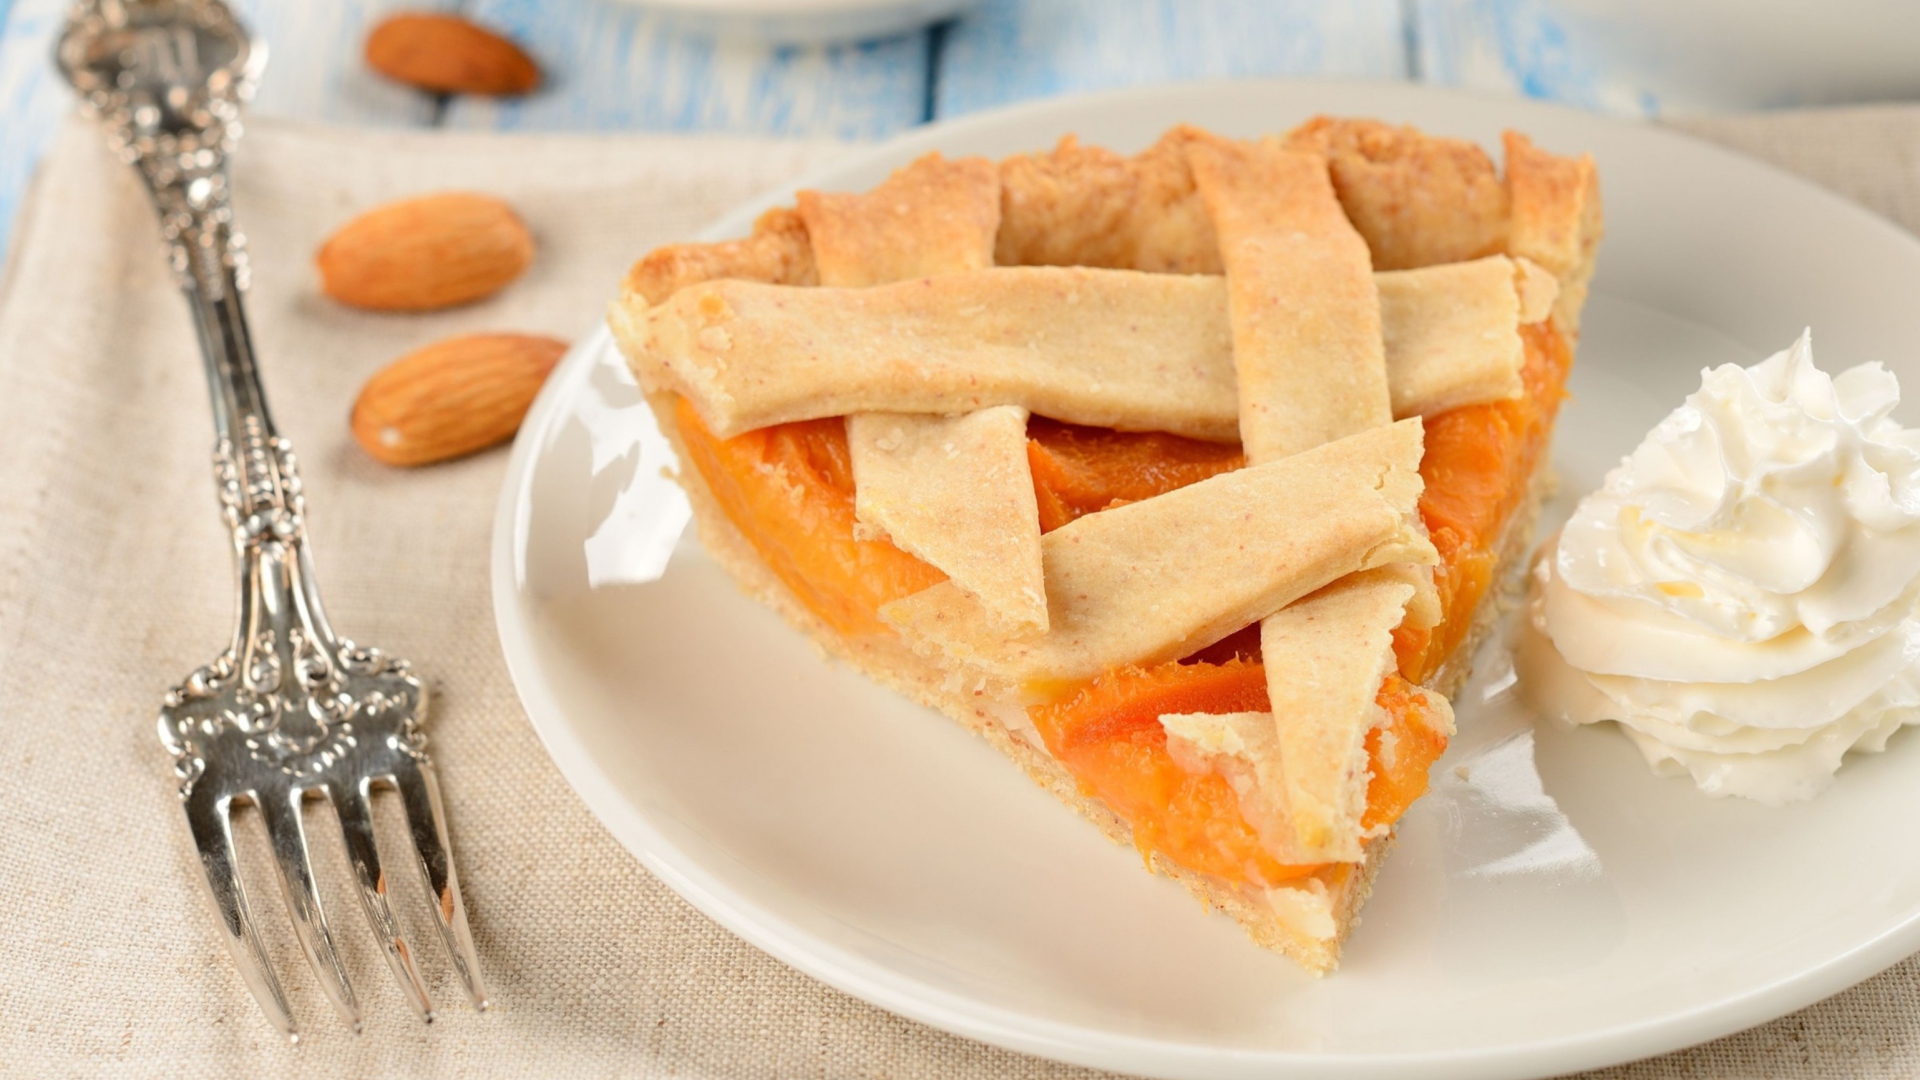 Das Apricot Pie With Whipped Cream Wallpaper 1920x1080